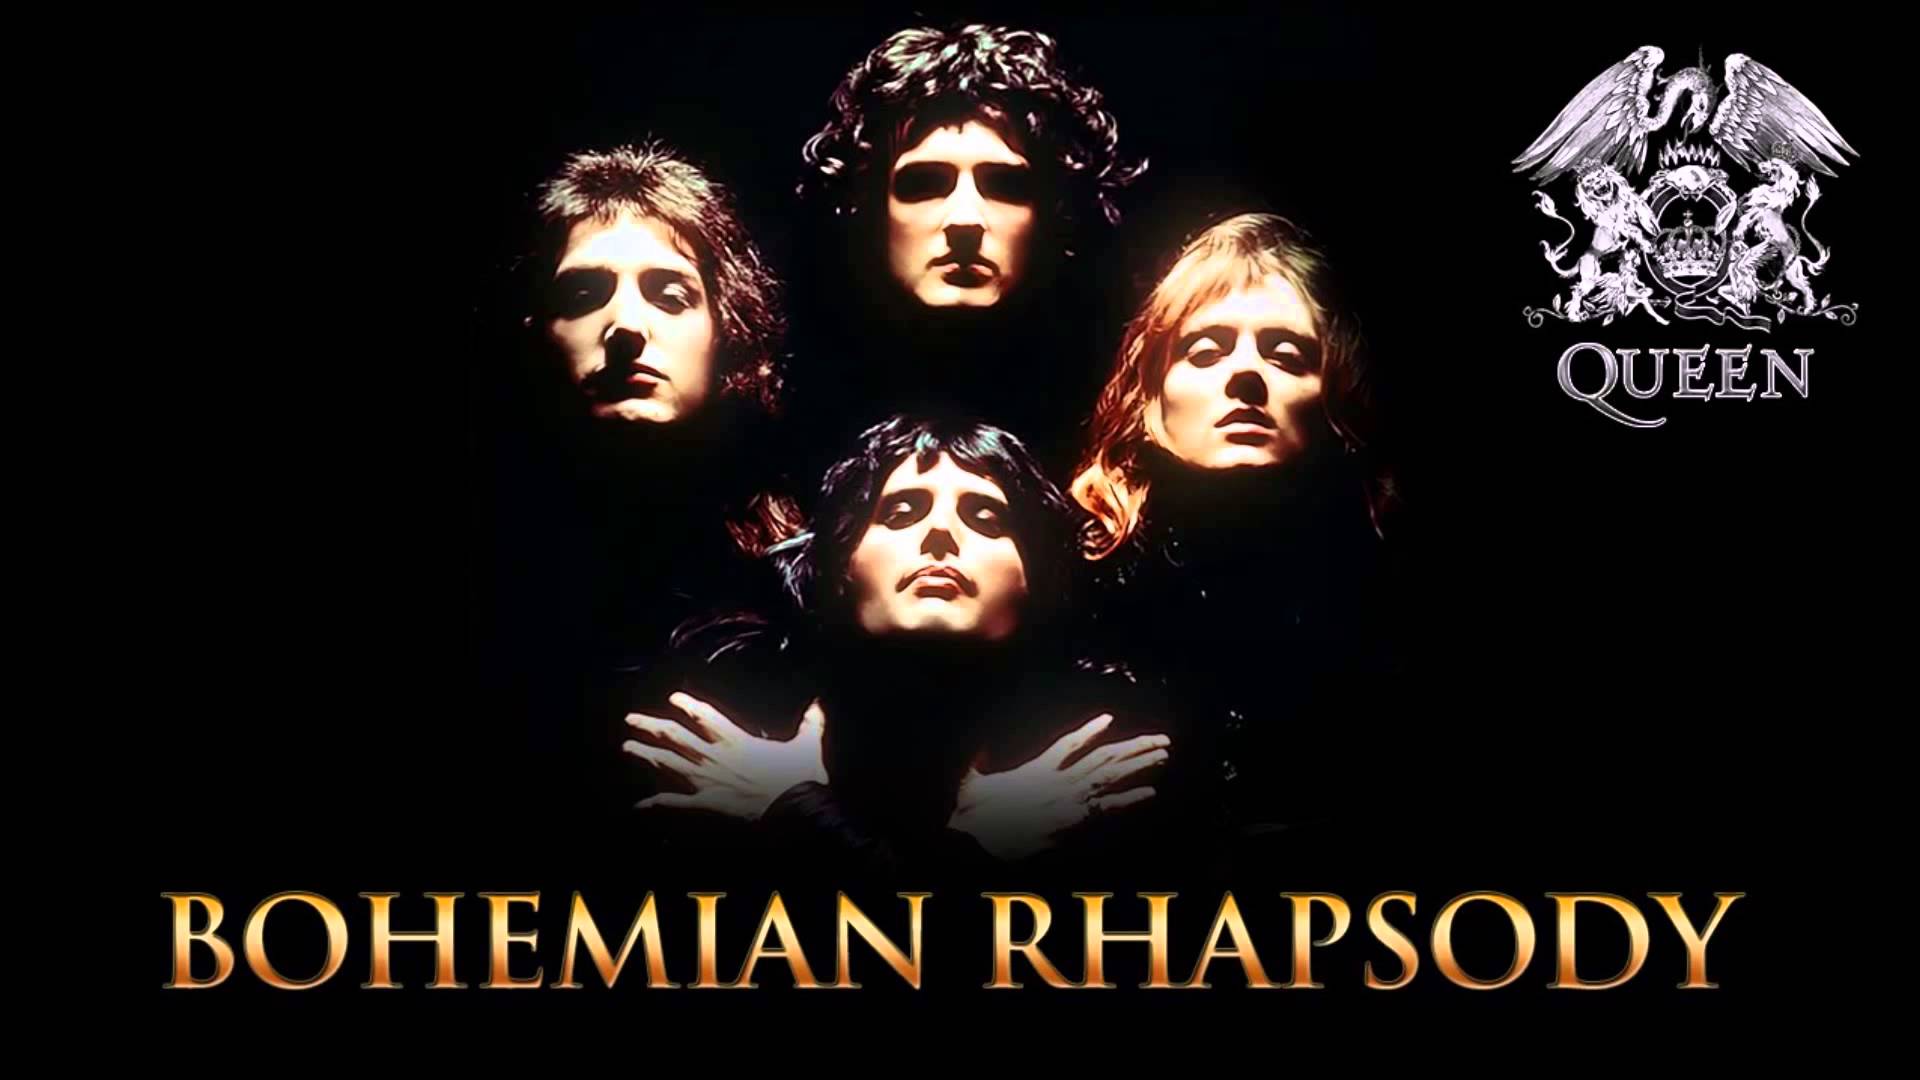 Bohemian Rhapsody download the new version for iphone